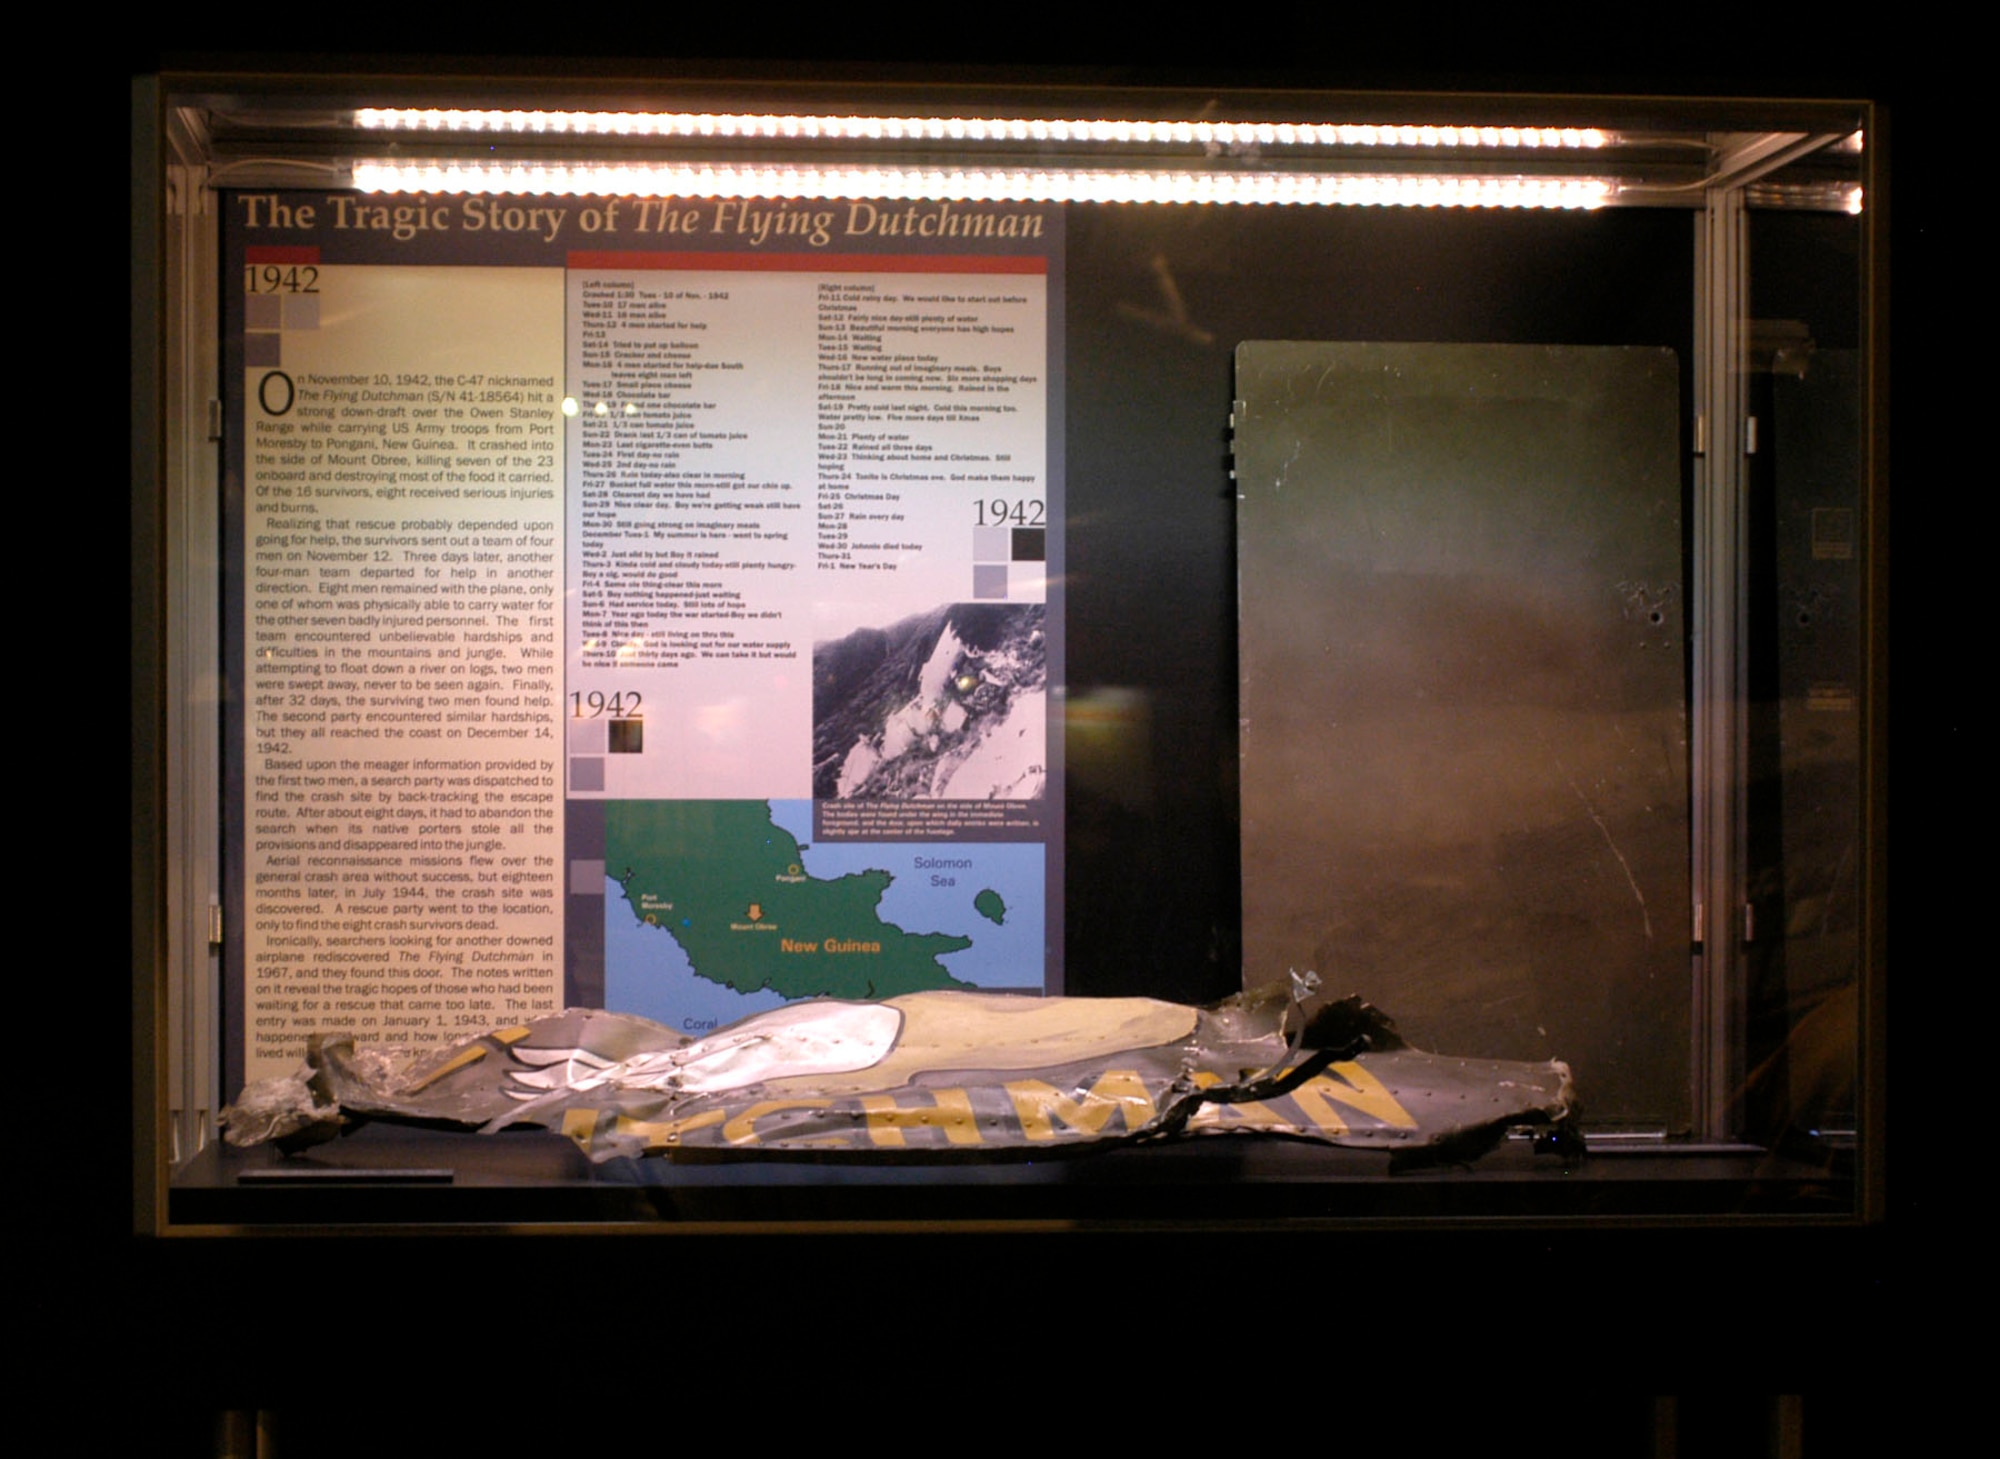 DAYTON, Ohio - An exhibit case of "The Tragic Story of The Flying Dutchman" on display in the World War II Gallery at the National Museum of the U.S. Air Force. (U.S. Air Force photo)